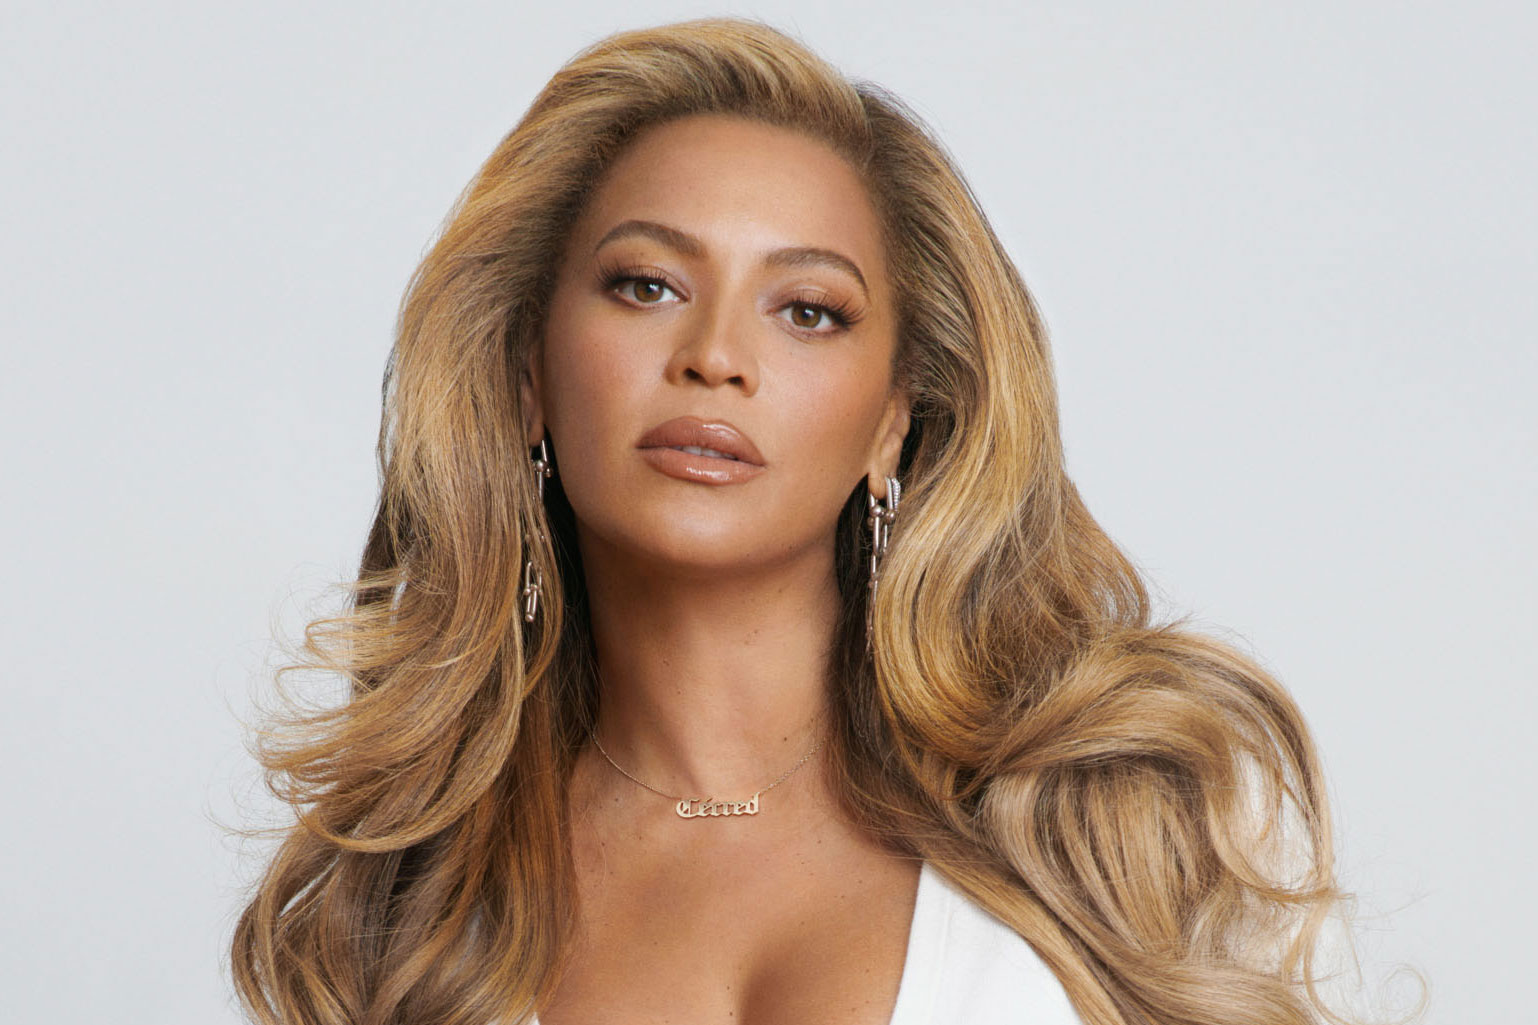 Beyoncé says she enjoys being disruptive and challenging everything through her music and hair